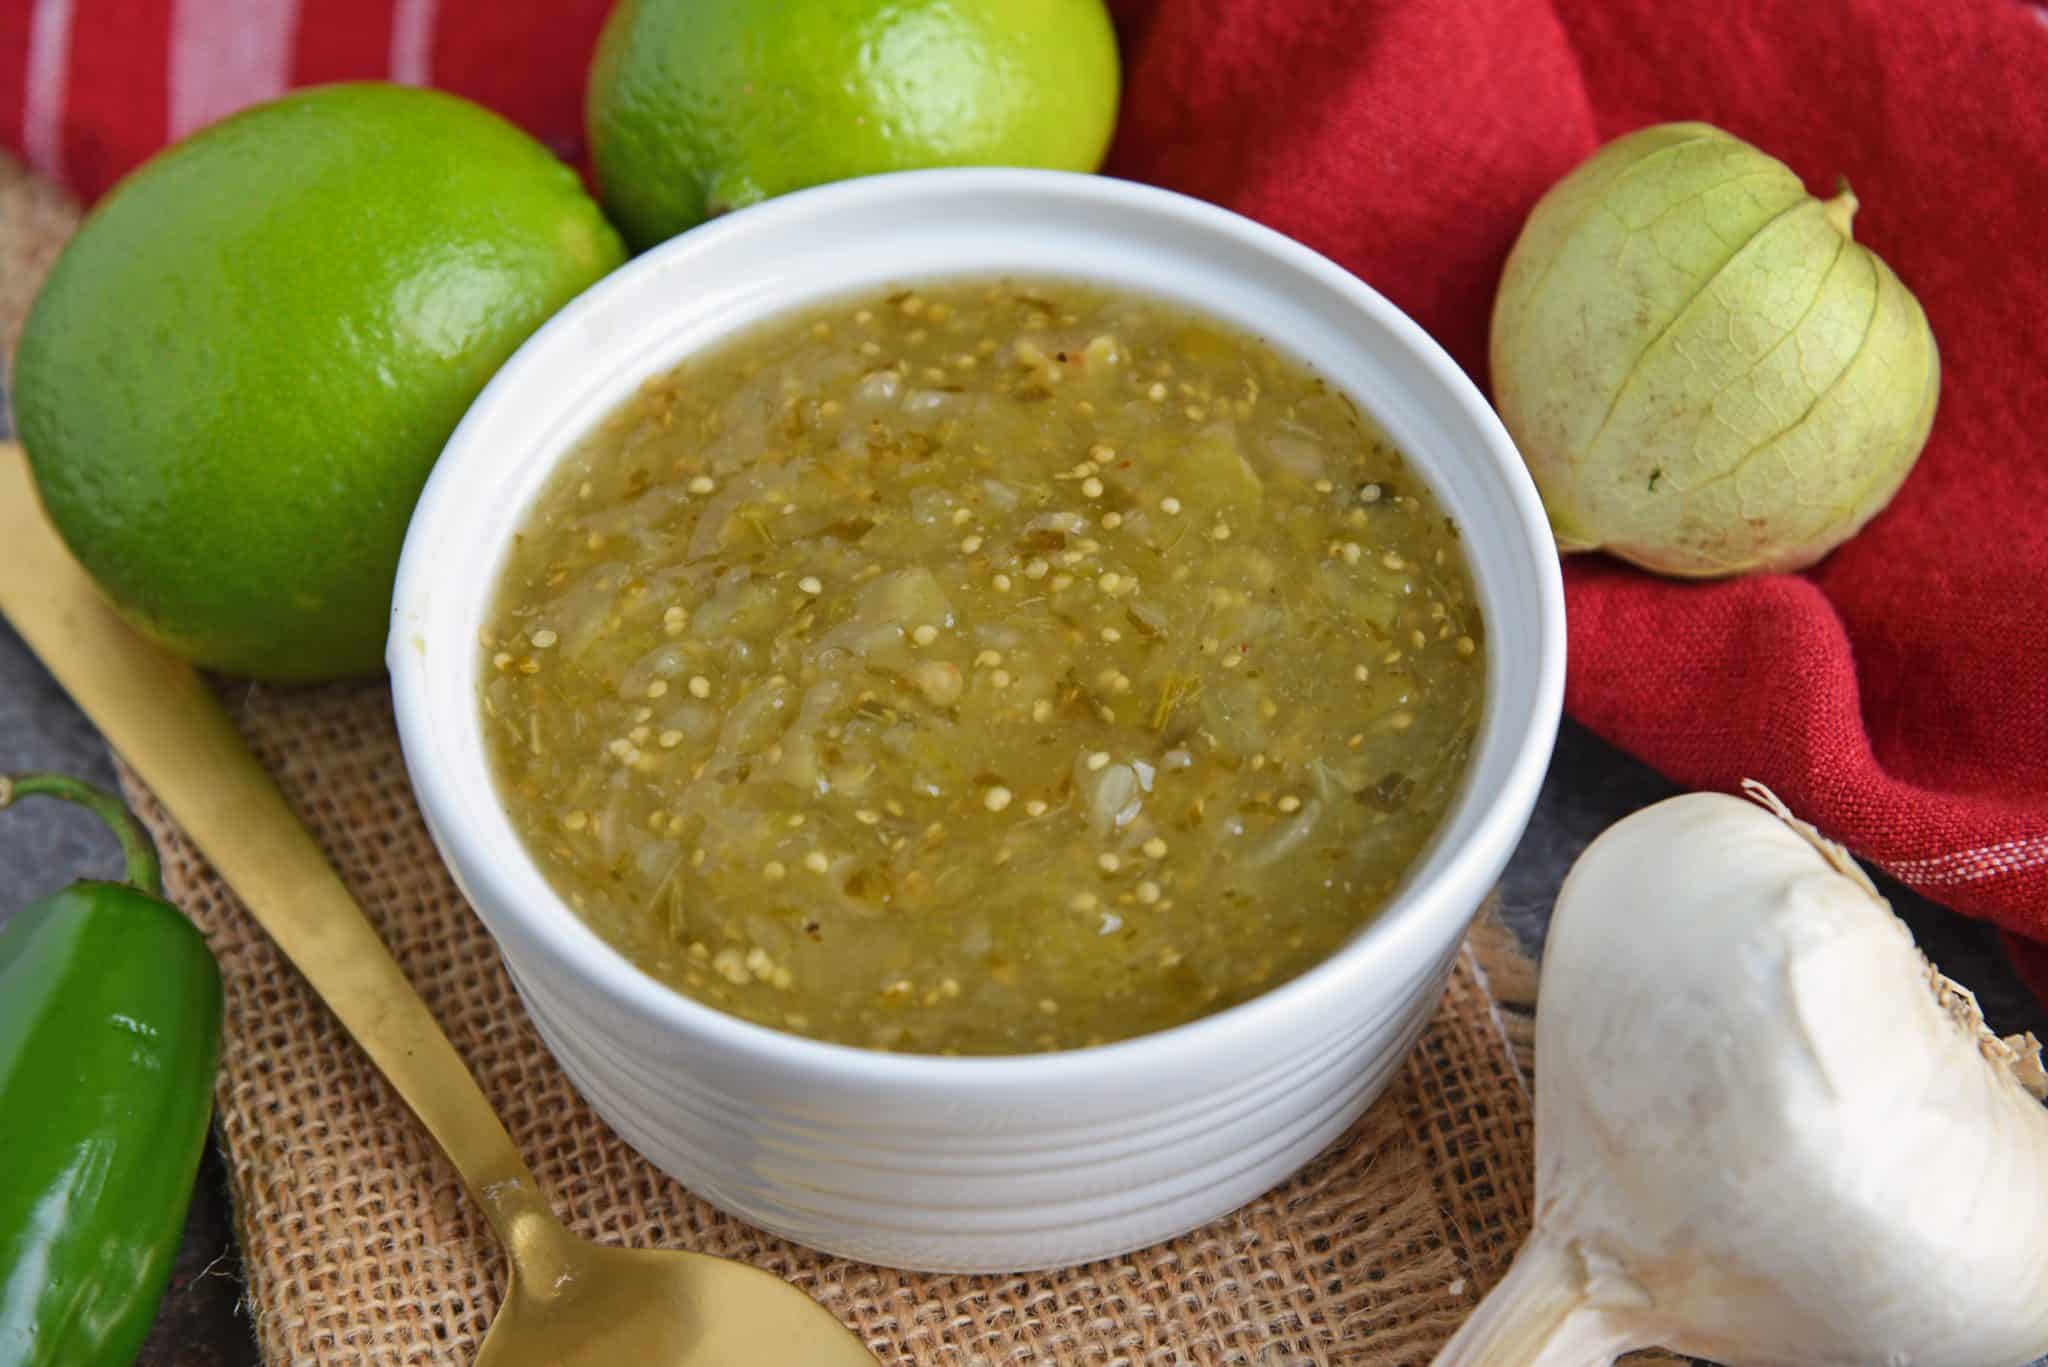 Tomatillo salsa is an easy, versatile homemade salsa that can be added to your favorite Mexican recipes or served as an appetizer with chips. #tomatillosalsa #salsaverde #greensalsa www.savoryexperiments.com